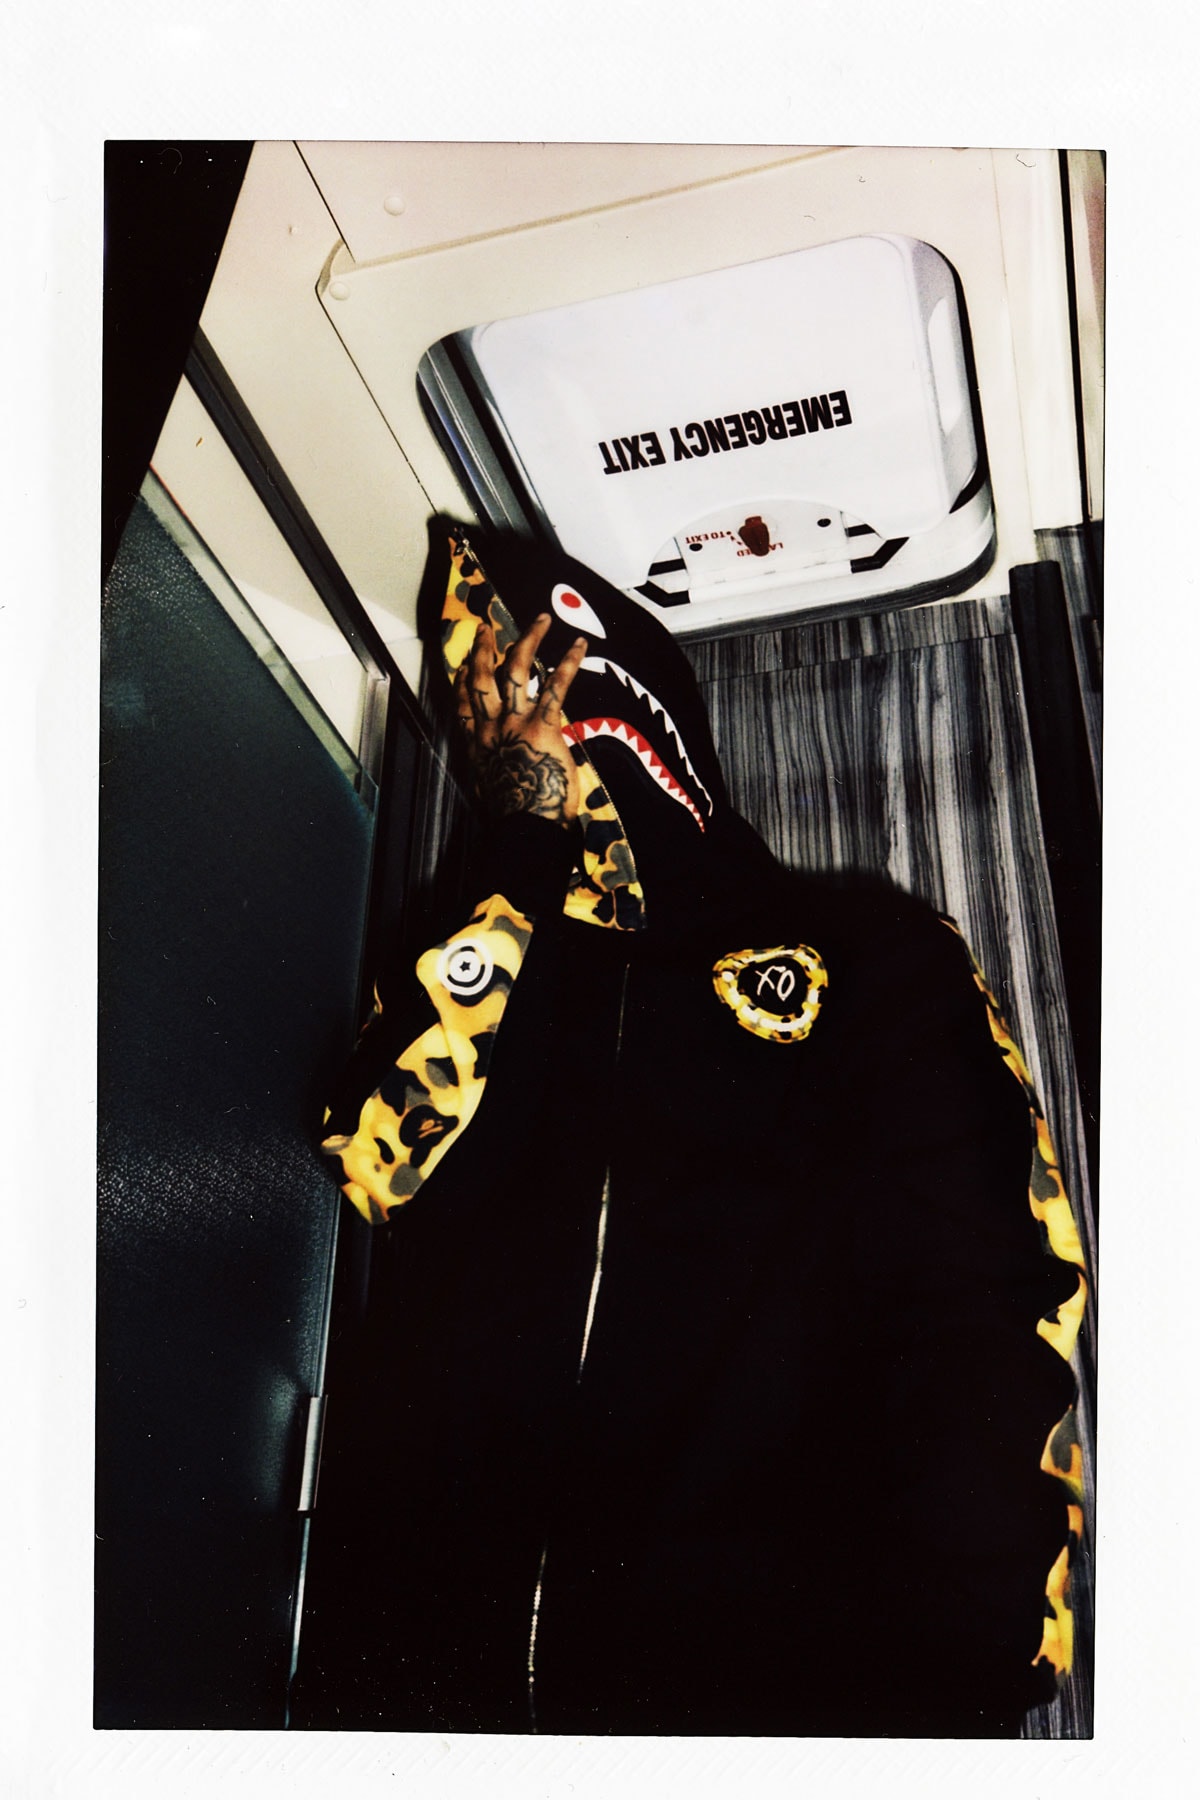 the weeknd bape collaboration lookbook release date drop august 4 2018 available cop buy purchase sale sell web store camouflage hoodie pants tee shirt work jacket hoodies collection official edition xo rug